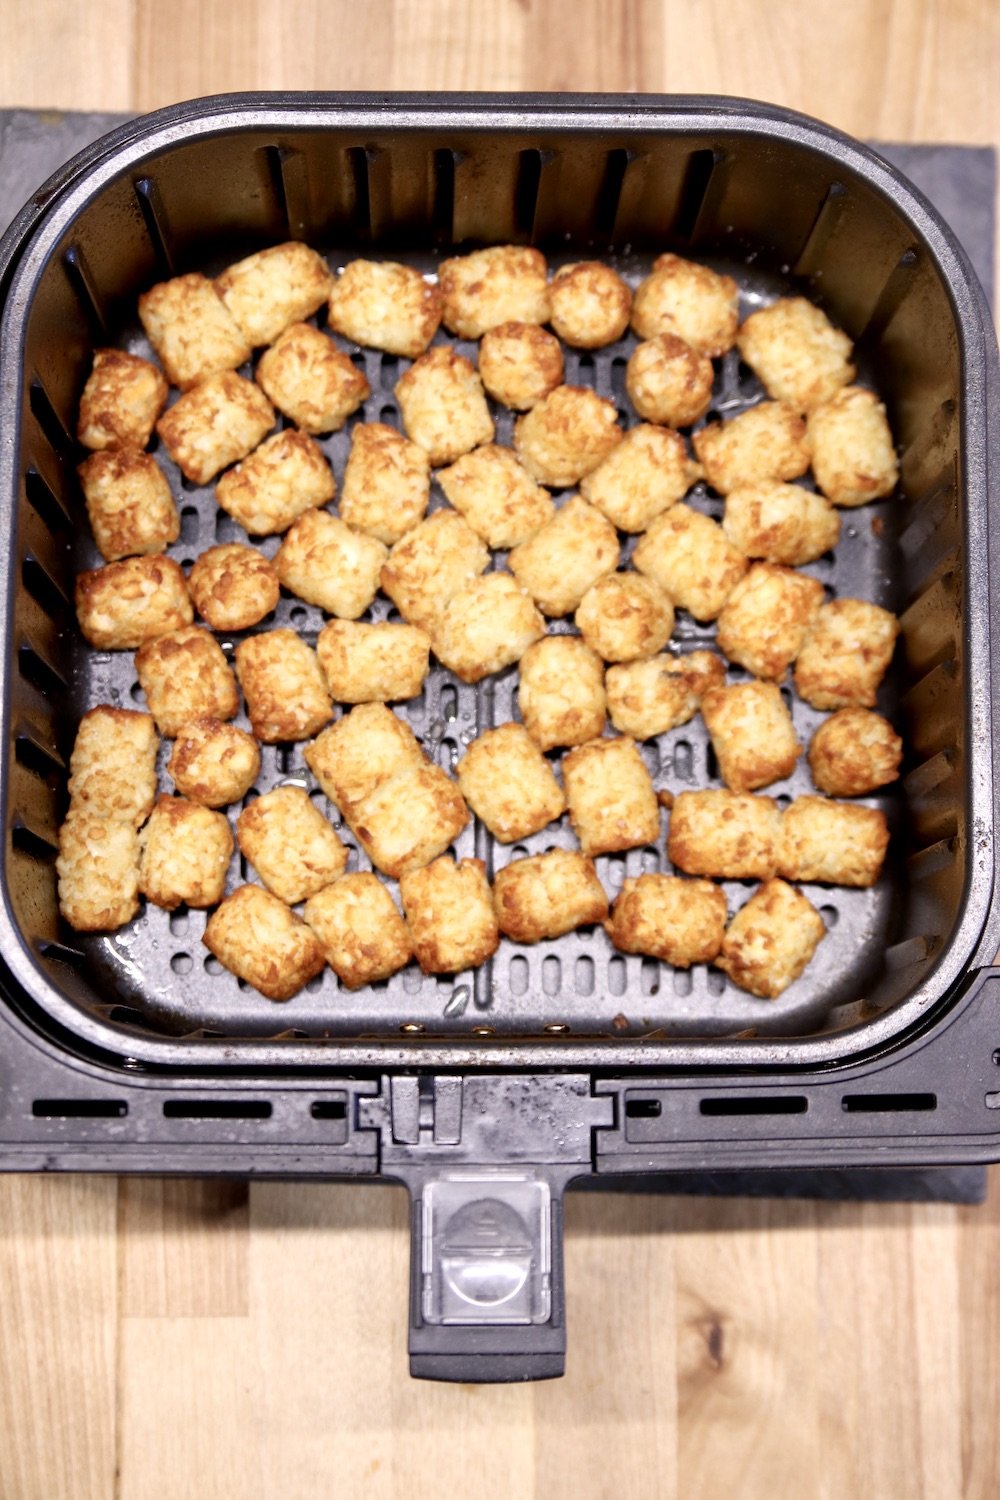 Air fryer basket with browned tater tots